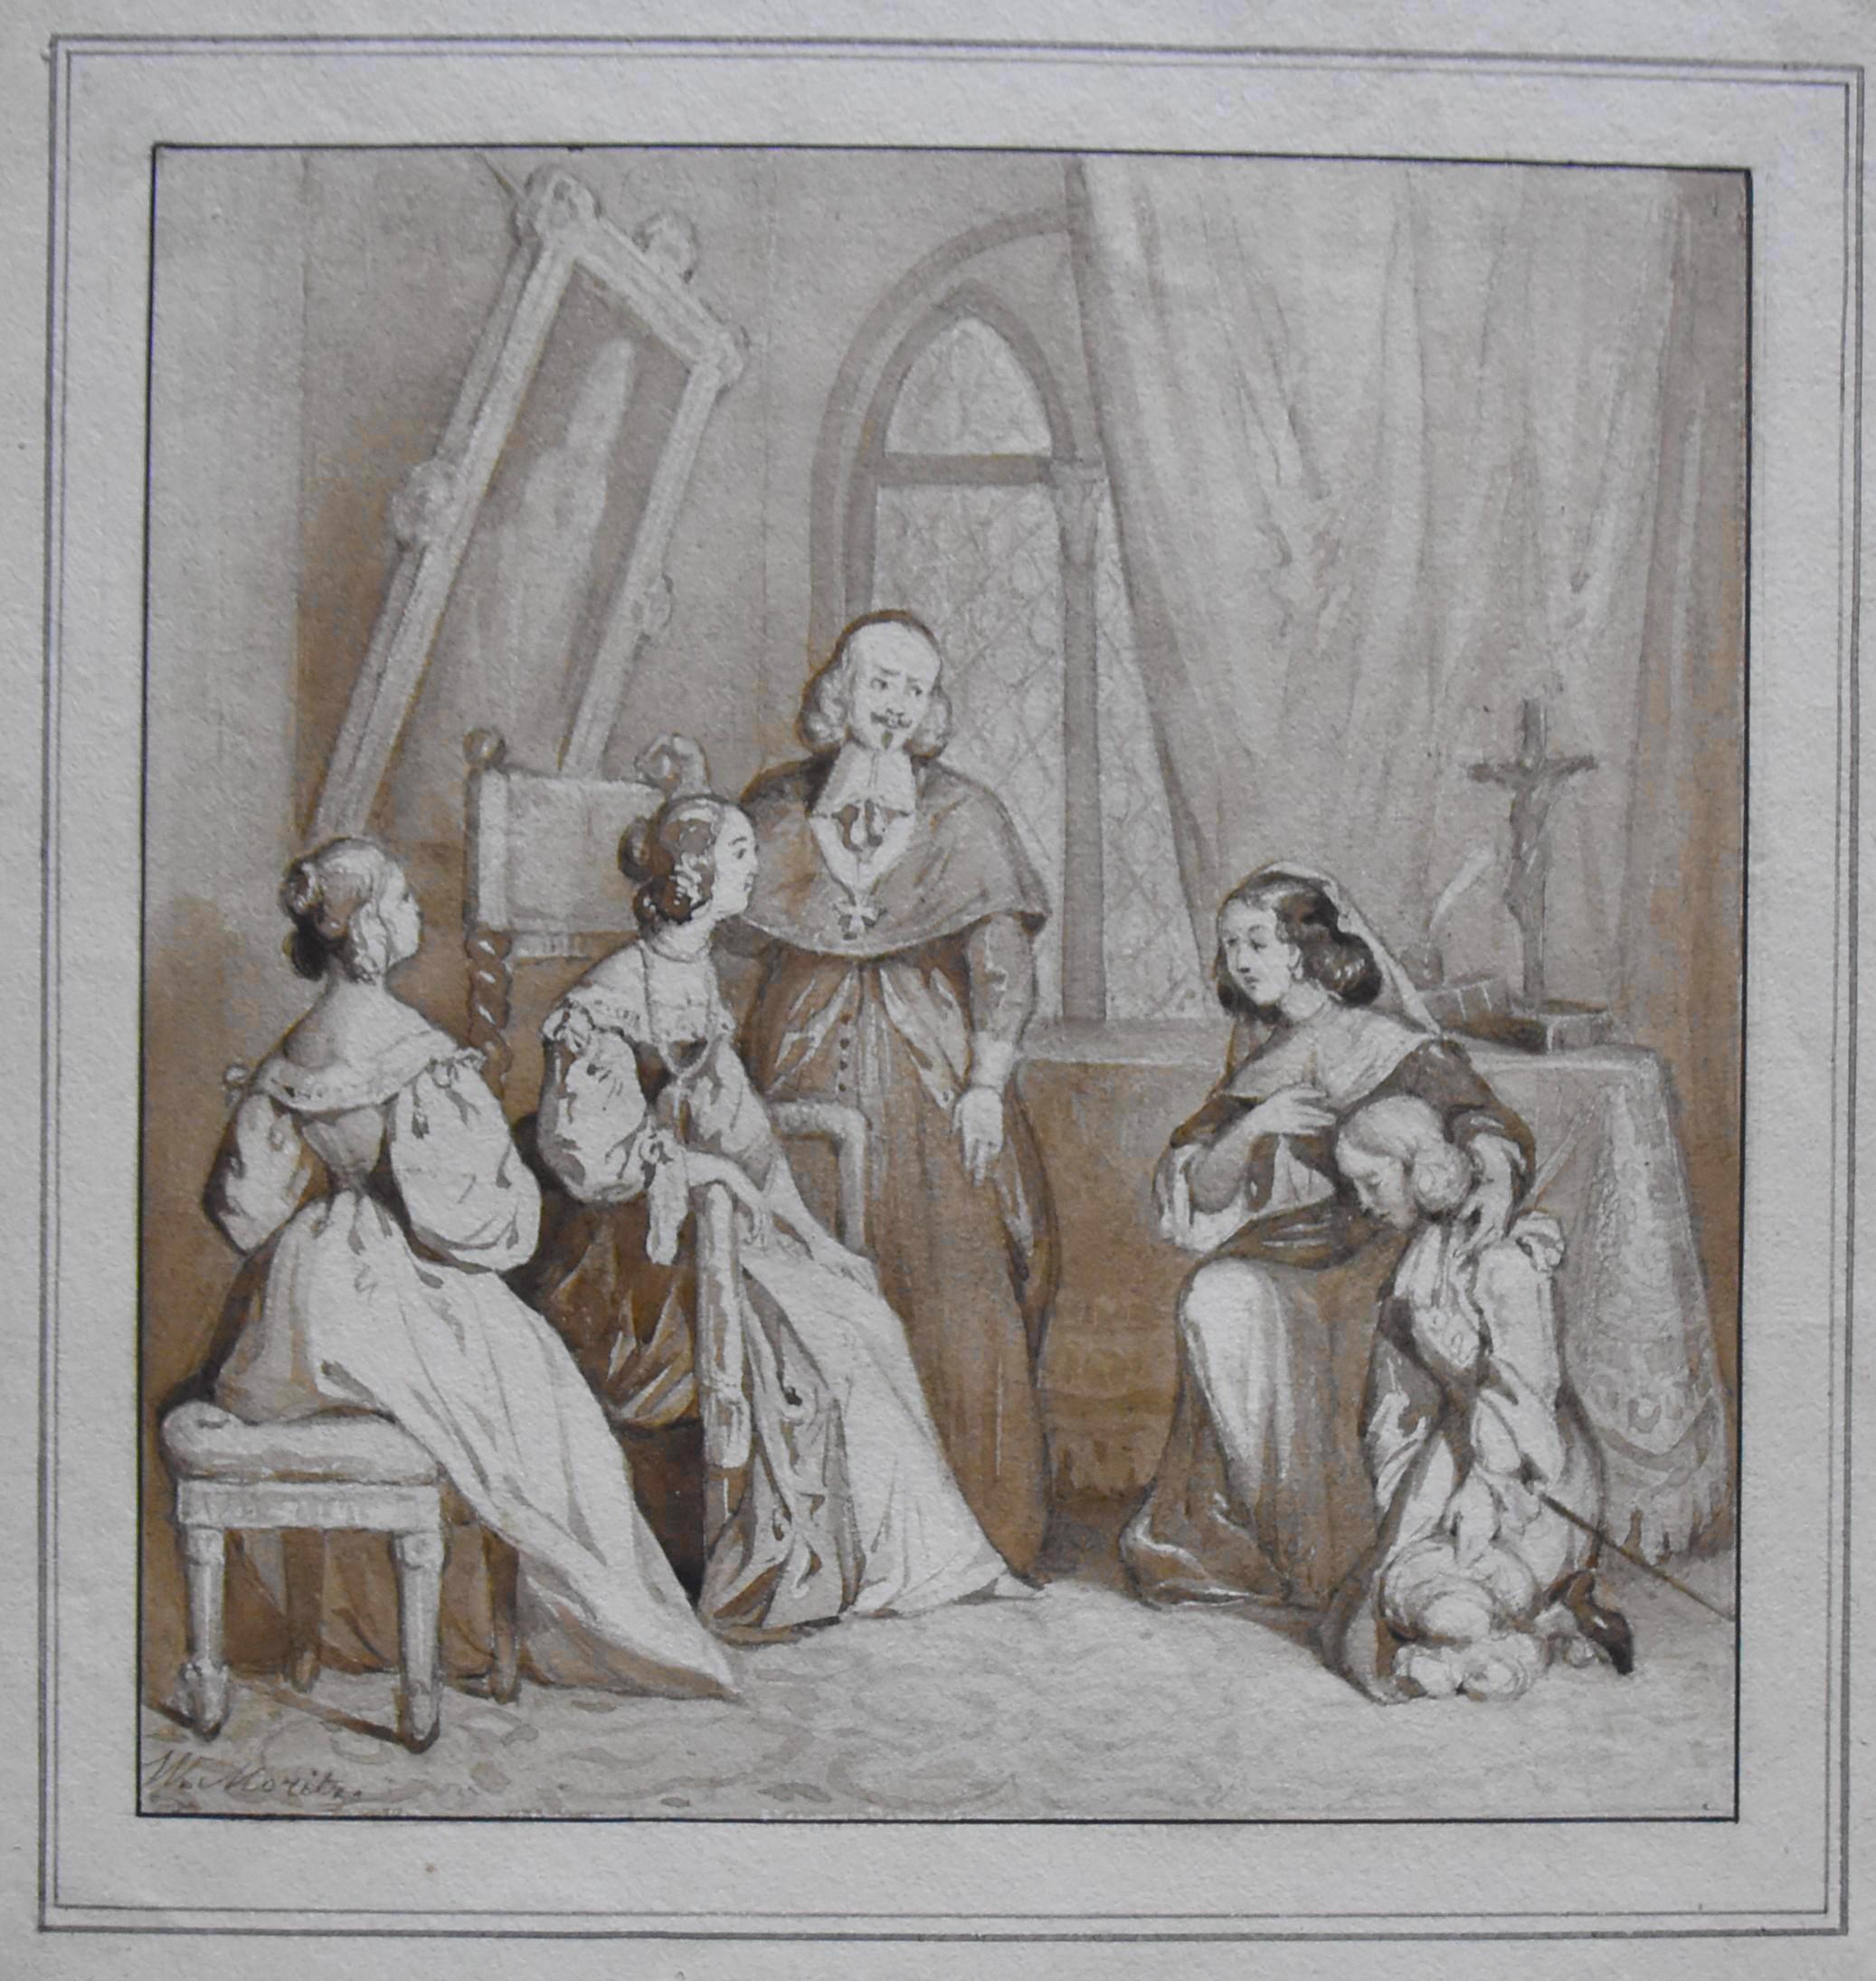 William Moritz (1816-1860) 
An historical scene,
signed lower left
Brown ink and brown ink wash on paper
17 x 16.5 cm
Framed : 27 x 23.5 cm

The subject of this charming drawing remains unclear but it's really easy to identify Queen Anne of Austria,